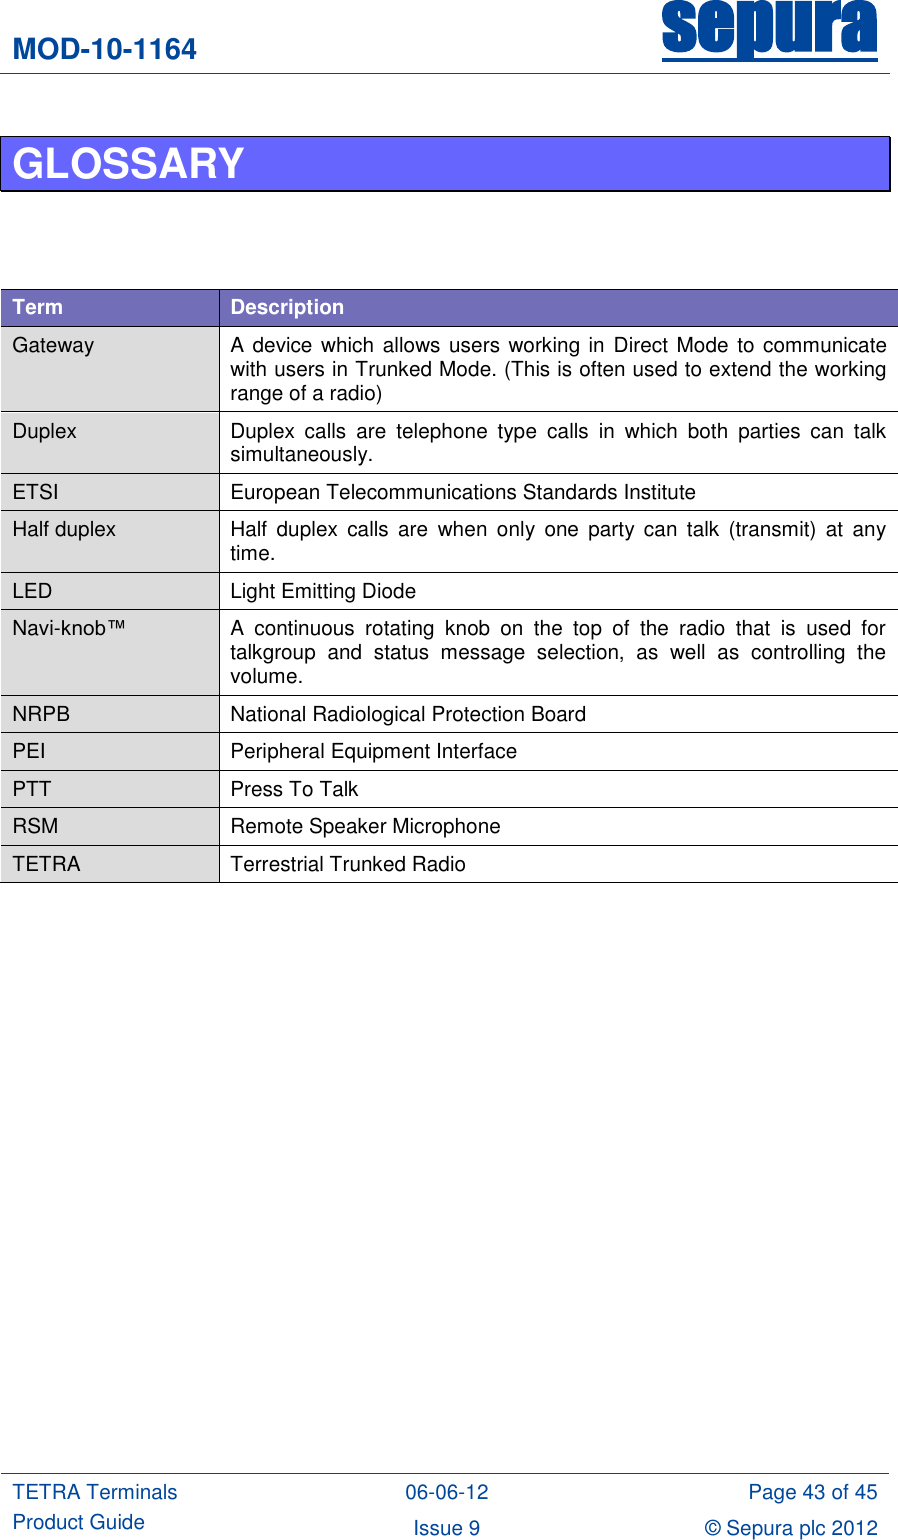 MOD-10-1164 sepura  TETRA Terminals Product Guide 06-06-12 Page 43 of 45 Issue 9 © Sepura plc 2012   GLOSSARY     Term Description Gateway A device  which  allows users working in Direct Mode  to communicate with users in Trunked Mode. (This is often used to extend the working range of a radio) Duplex Duplex  calls  are  telephone  type  calls  in  which  both  parties  can  talk simultaneously.  ETSI European Telecommunications Standards Institute Half duplex Half  duplex  calls  are  when  only  one  party  can  talk  (transmit) at  any time. LED Light Emitting Diode Navi-knob™  A  continuous  rotating  knob  on  the  top  of  the  radio  that  is  used  for talkgroup  and  status  message  selection,  as  well  as  controlling  the volume. NRPB National Radiological Protection Board PEI Peripheral Equipment Interface PTT Press To Talk RSM Remote Speaker Microphone TETRA Terrestrial Trunked Radio     